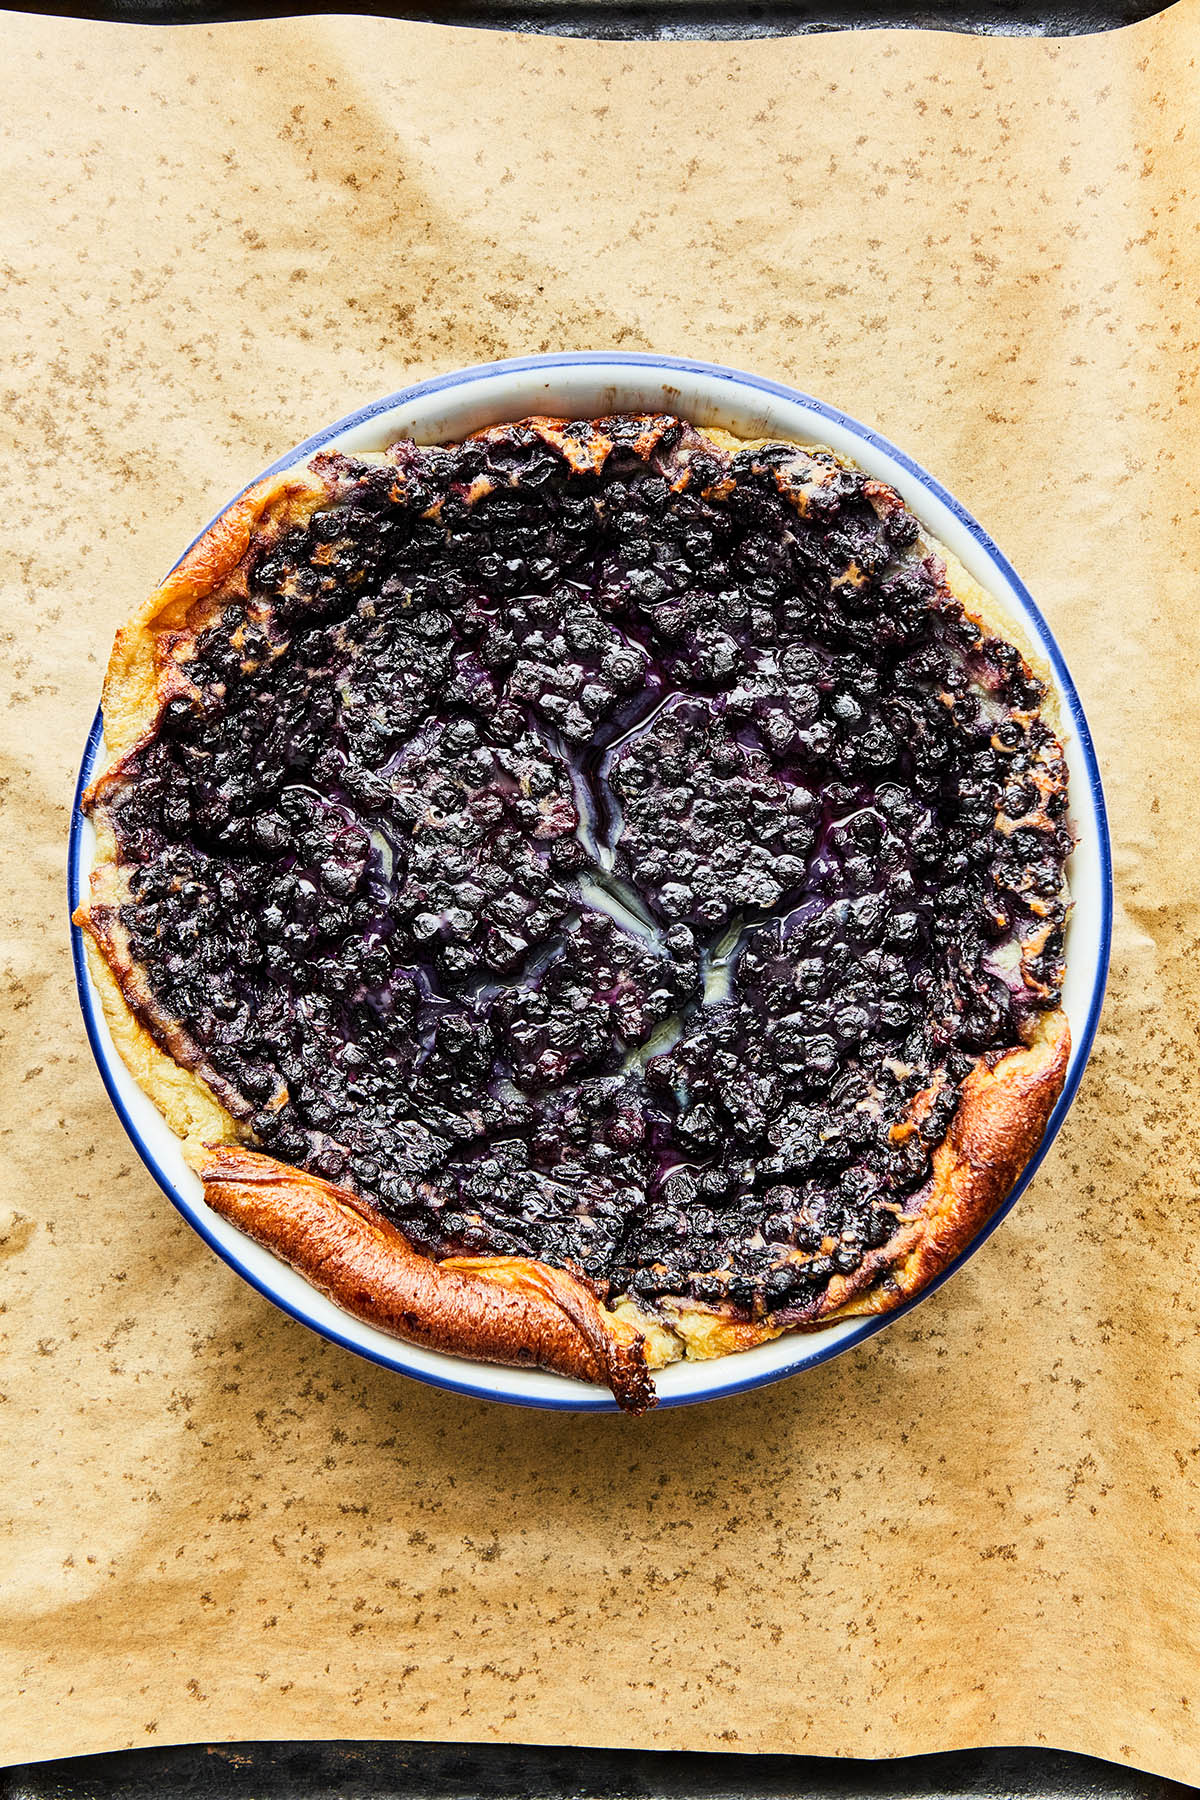 A whole baked blueberry clafoutis on a parchment paper-lined baking sheet.